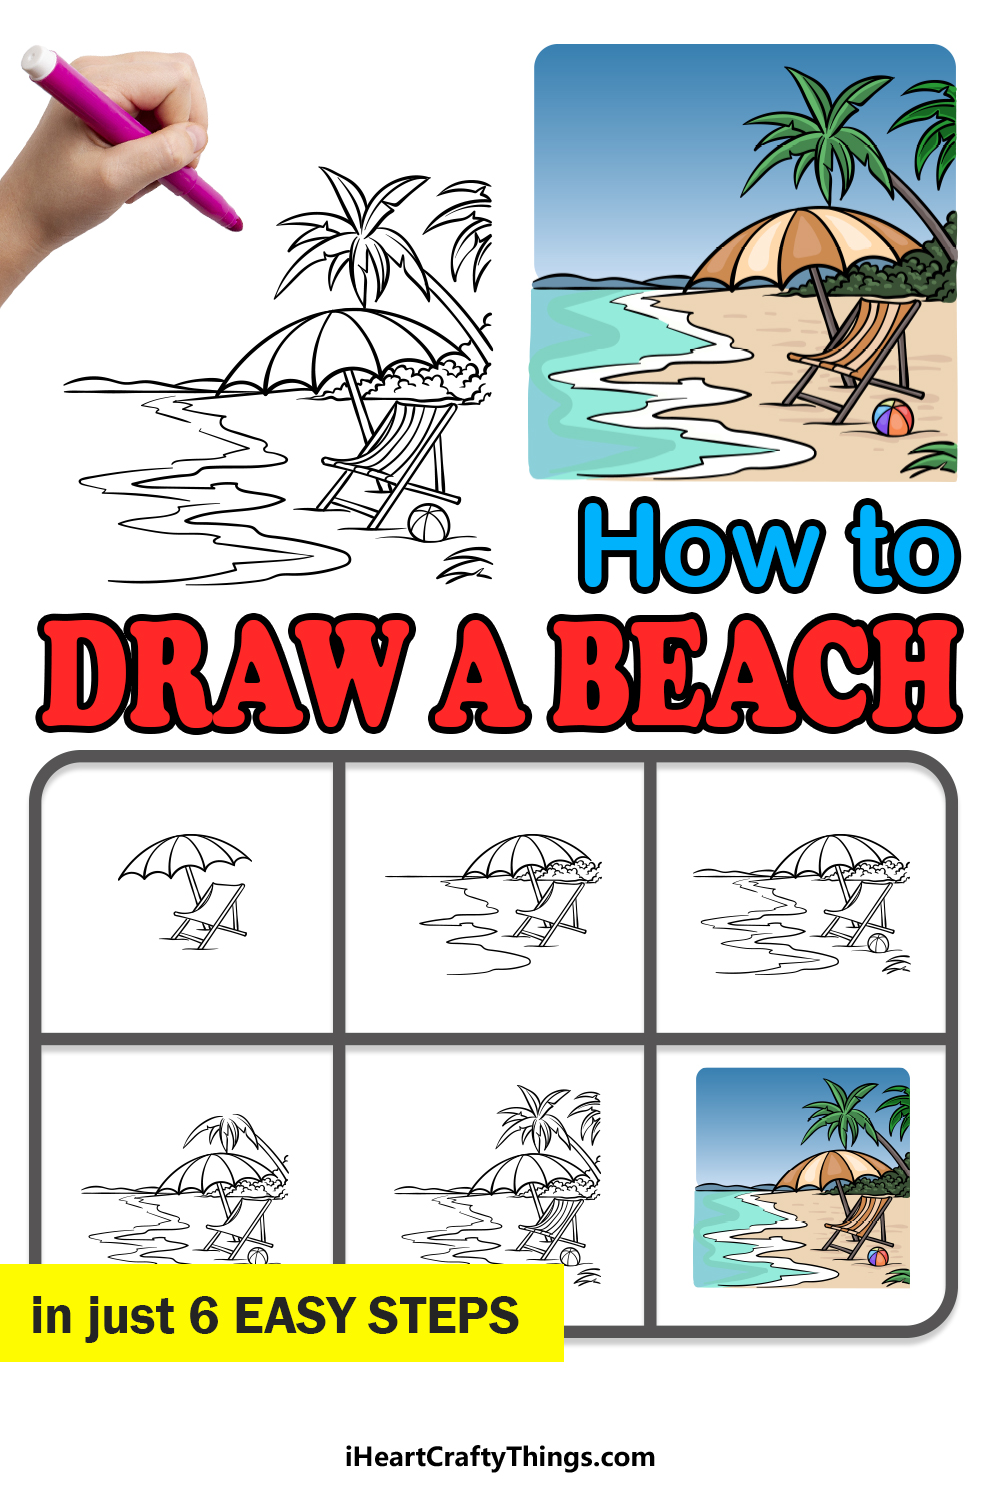 How To Draw Beach - Easy Drawings Of Beaches - 680x678 PNG Download - PNGkit